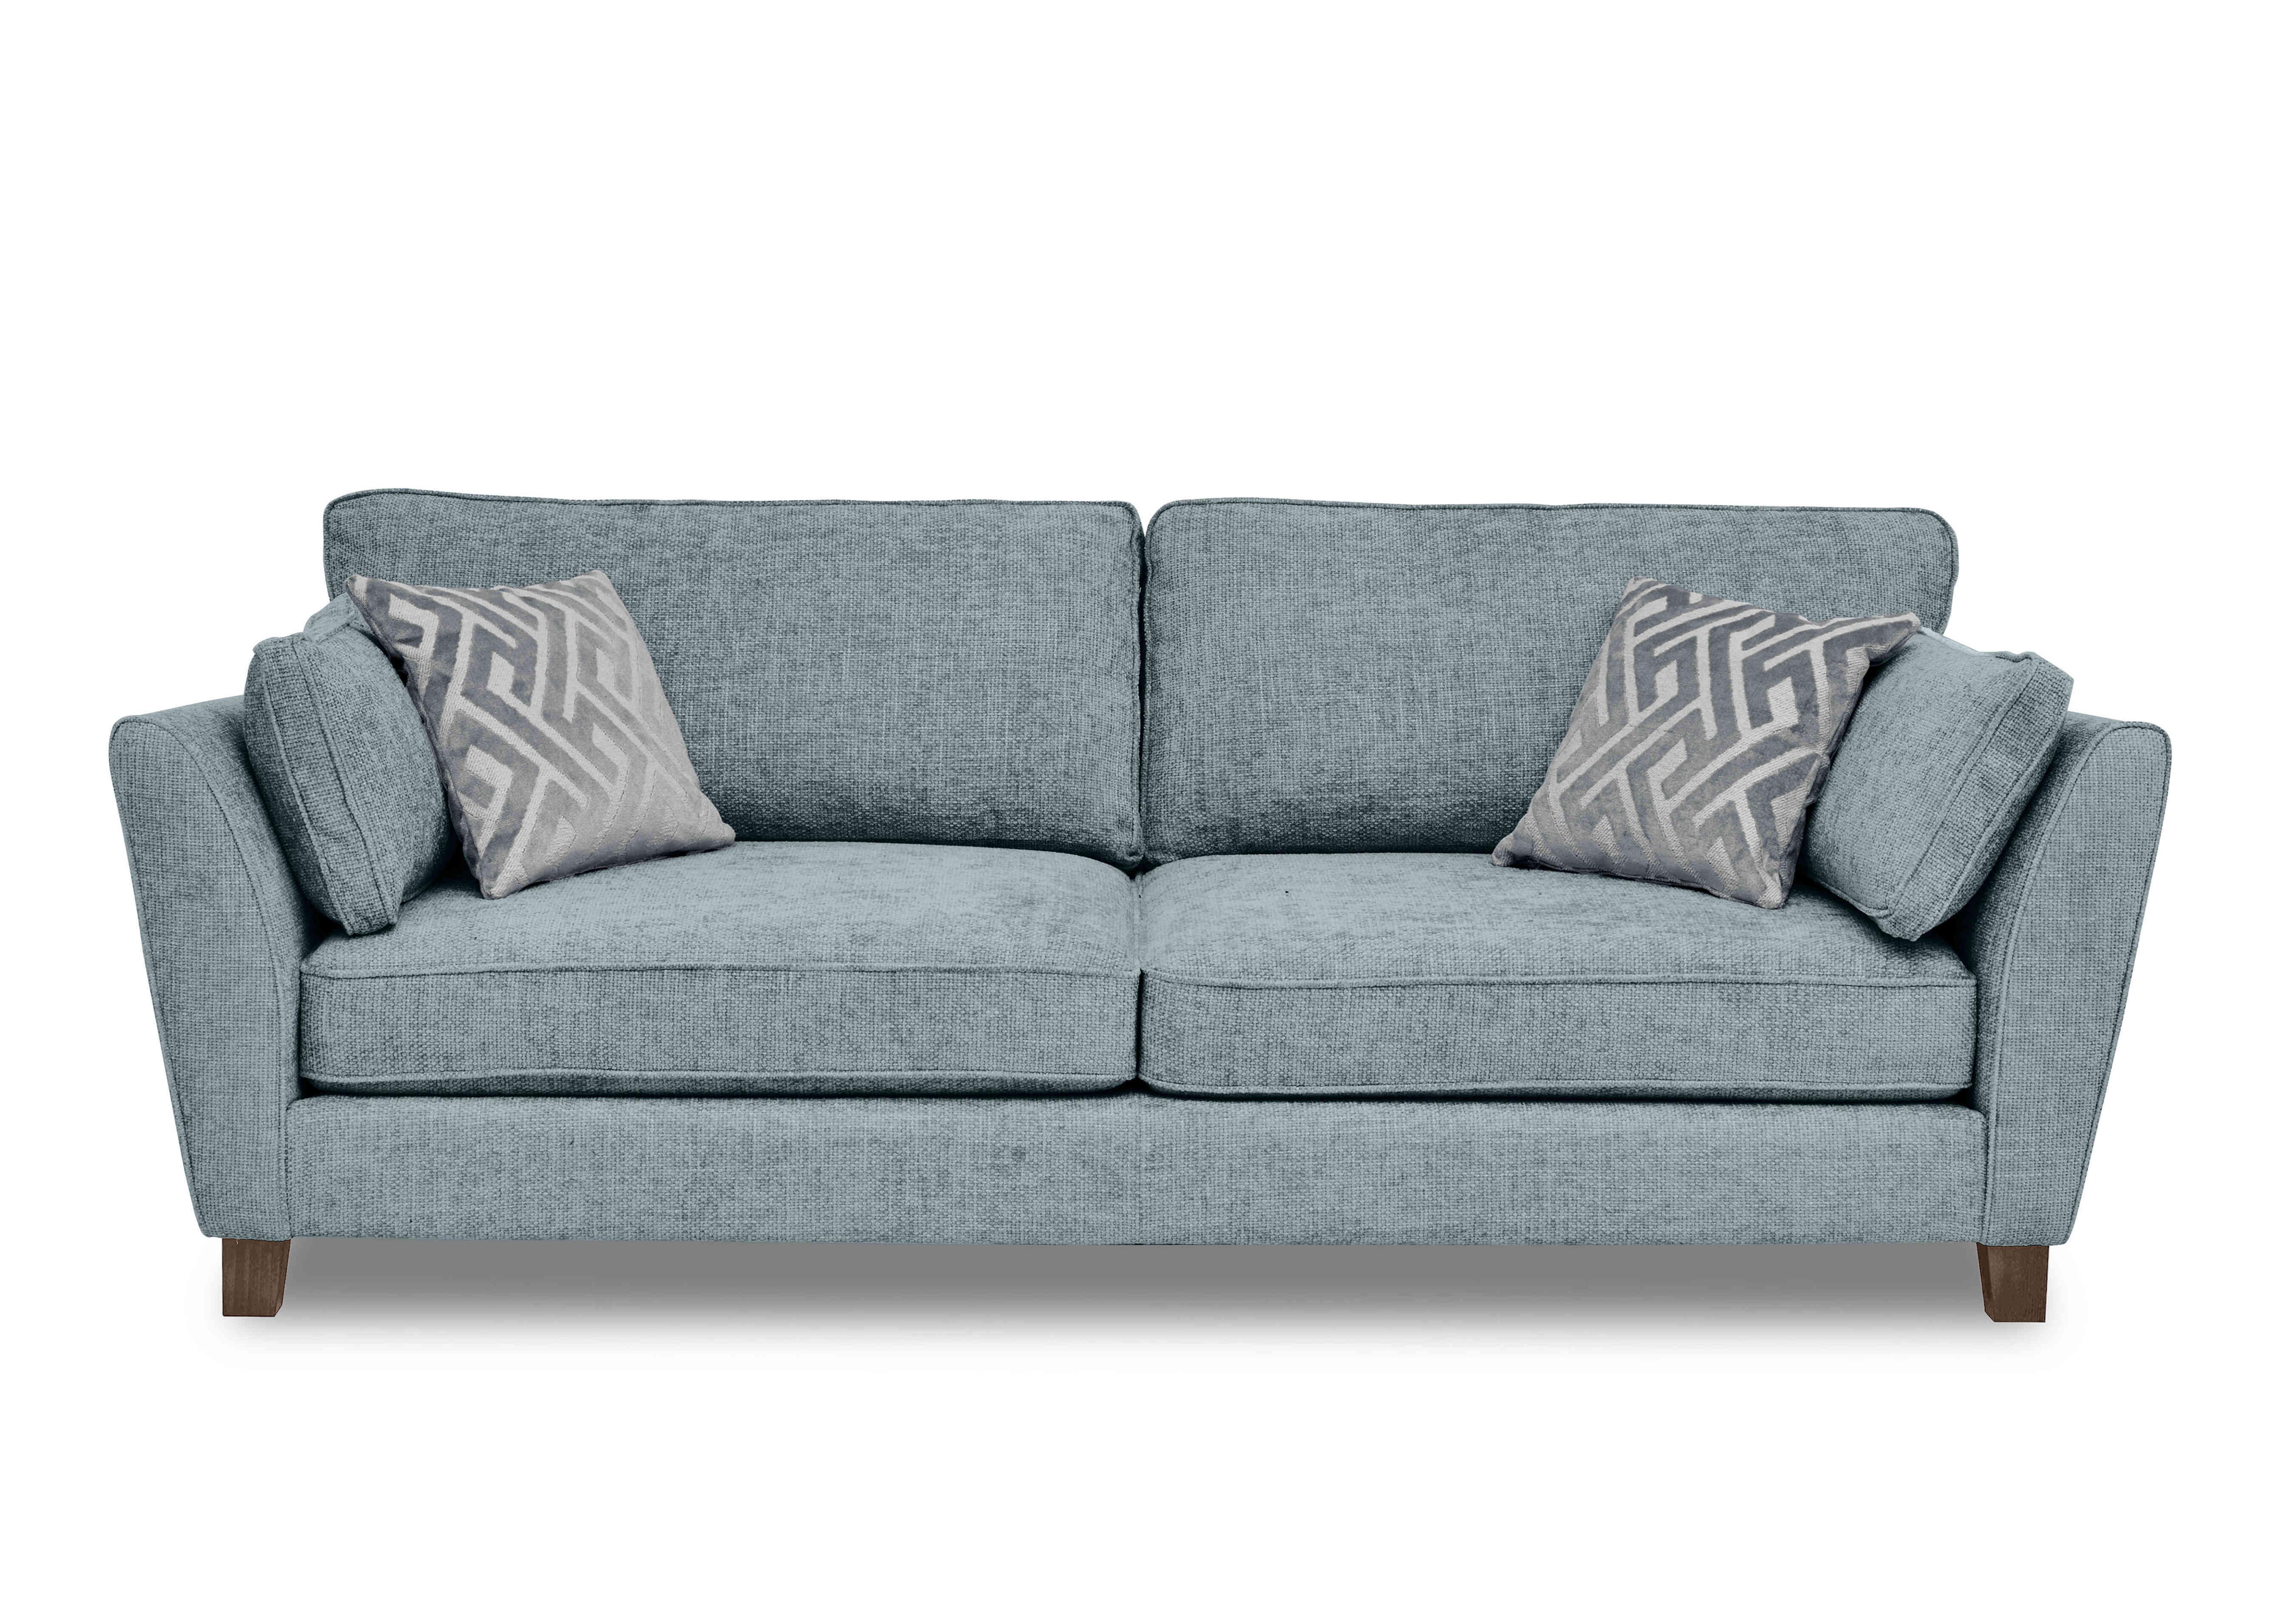 Tabitha 4 Seater Sofa in Duck Egg on Furniture Village